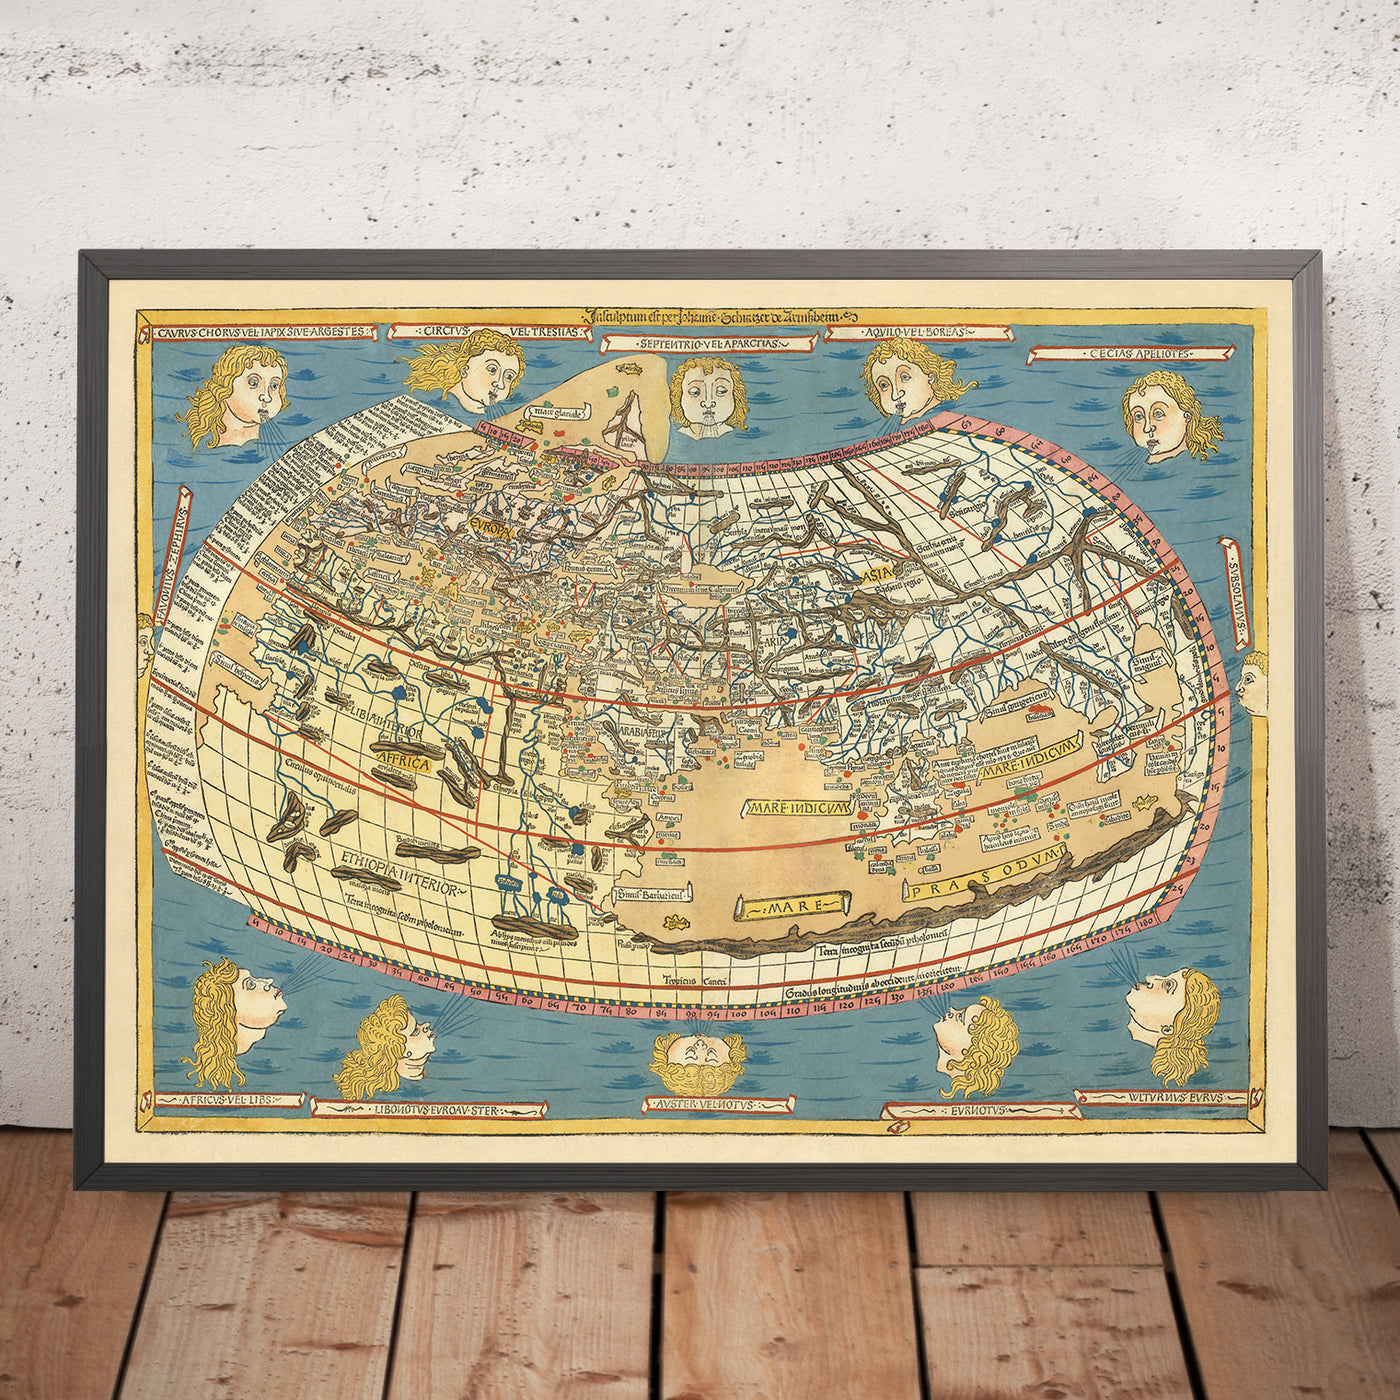 Rare Old World Map of the World by Ptolemy, 1486: One of the First World Atlases